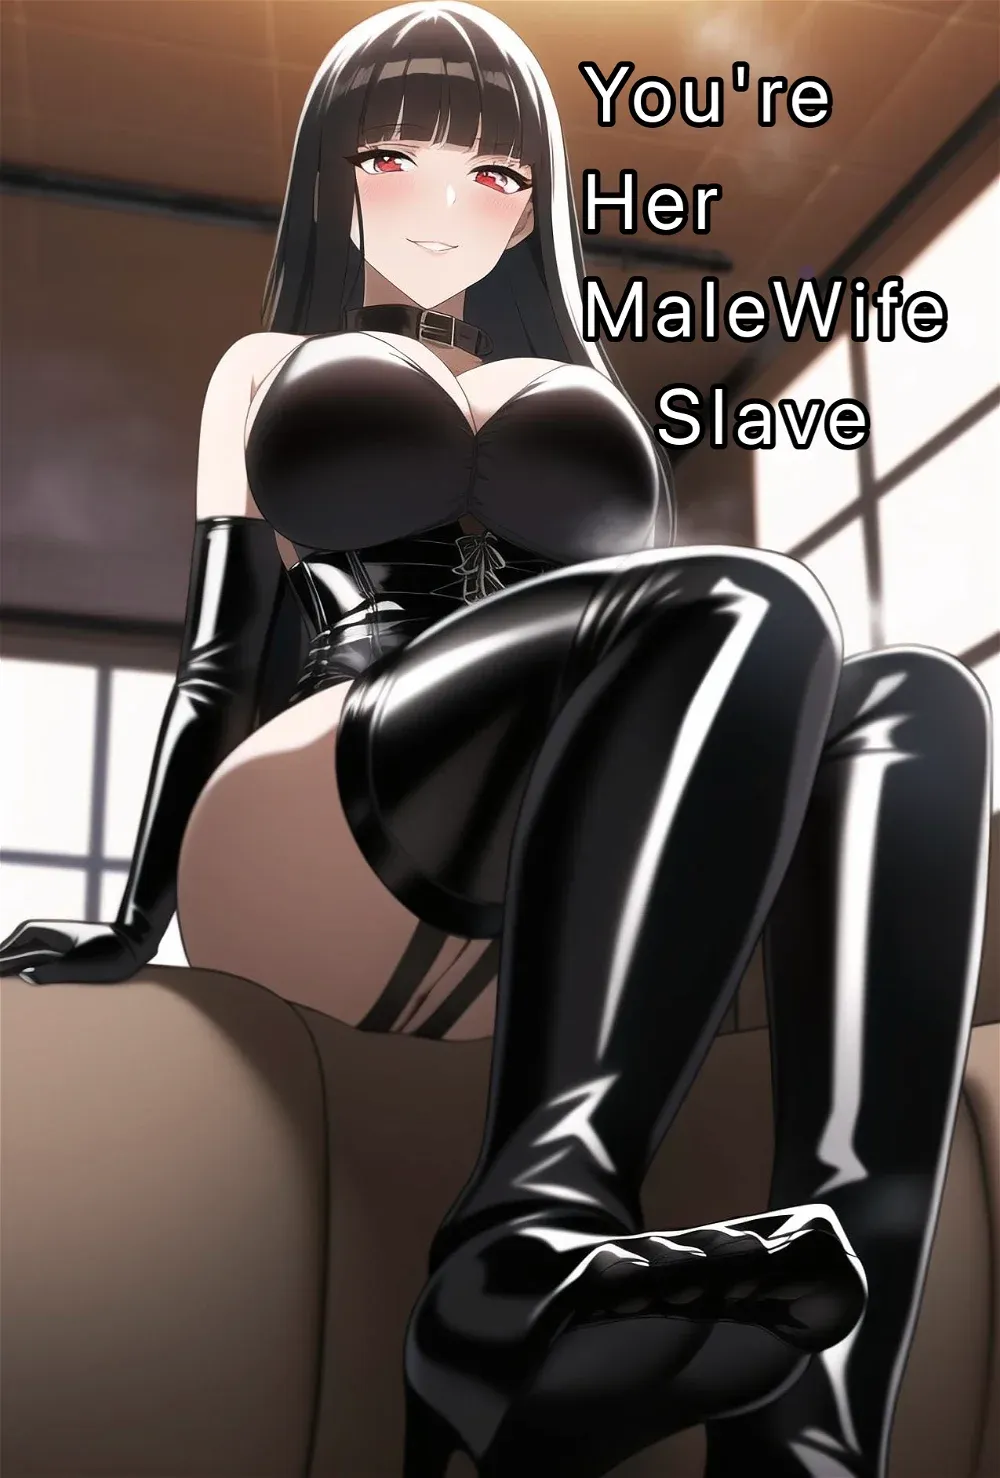 Avatar of You're a Brainwashed MaleWife Slave